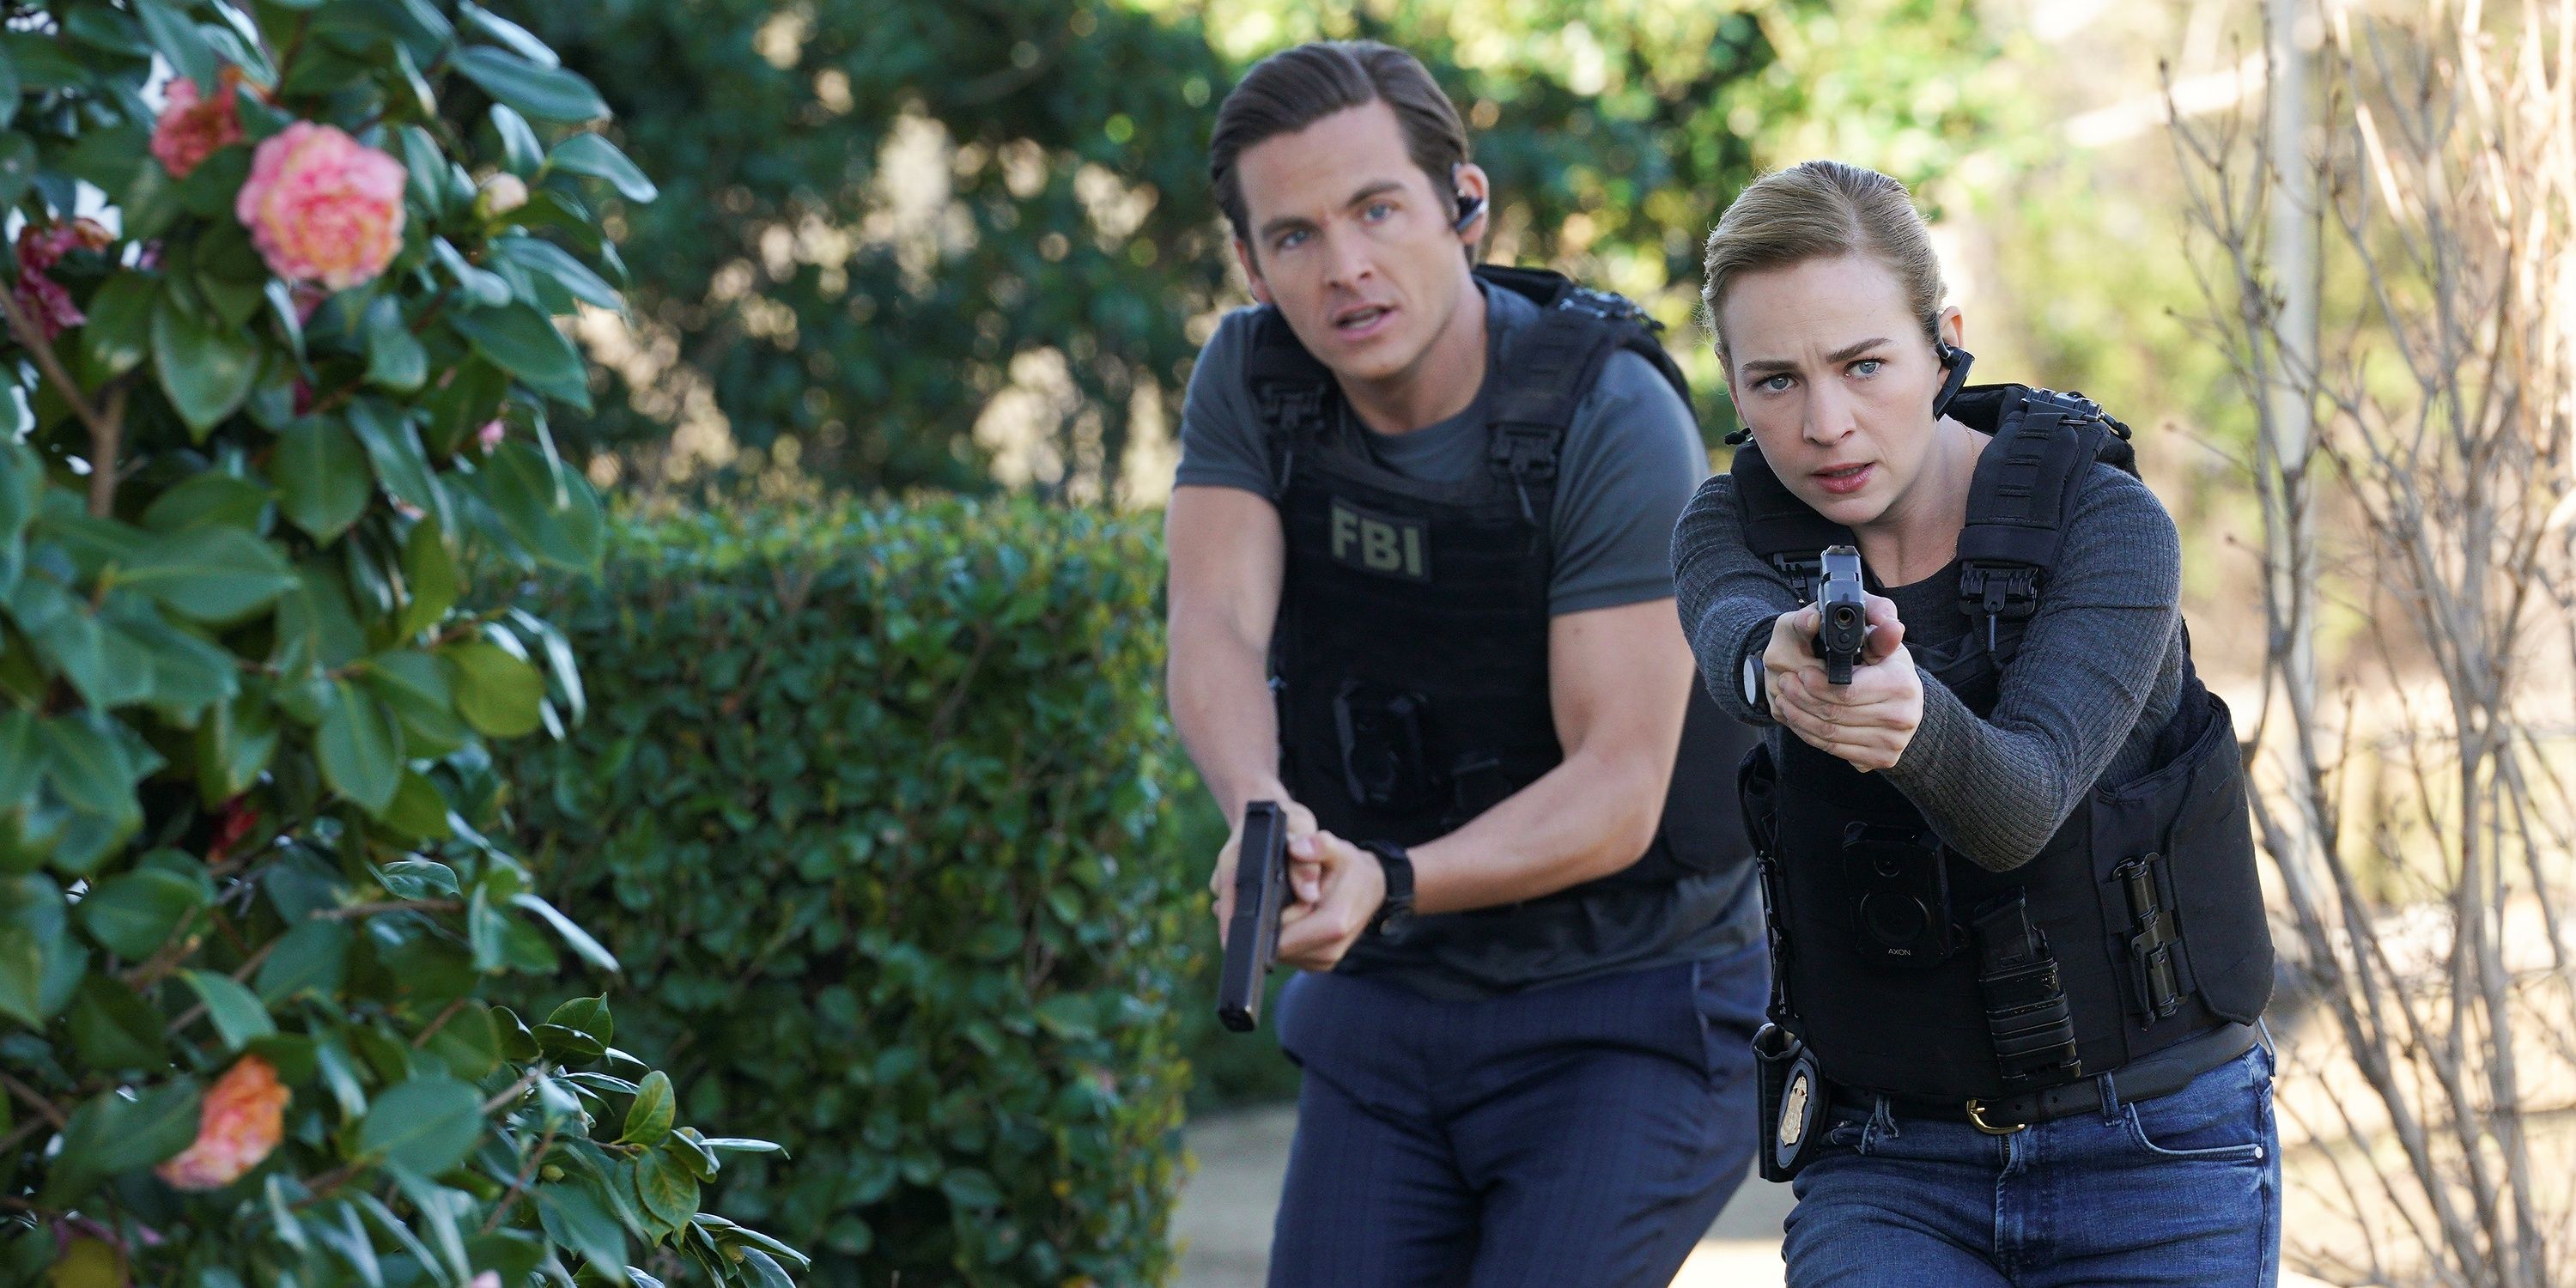 Laura and Brendon track down a suspect in The Rookie: Feds season 1. Laura wears a black bullet proof vest over a dark gray long-sleeved shirt and jeans. Brendon wears a black bullet proof vest over a dark gray shirt and jeans.